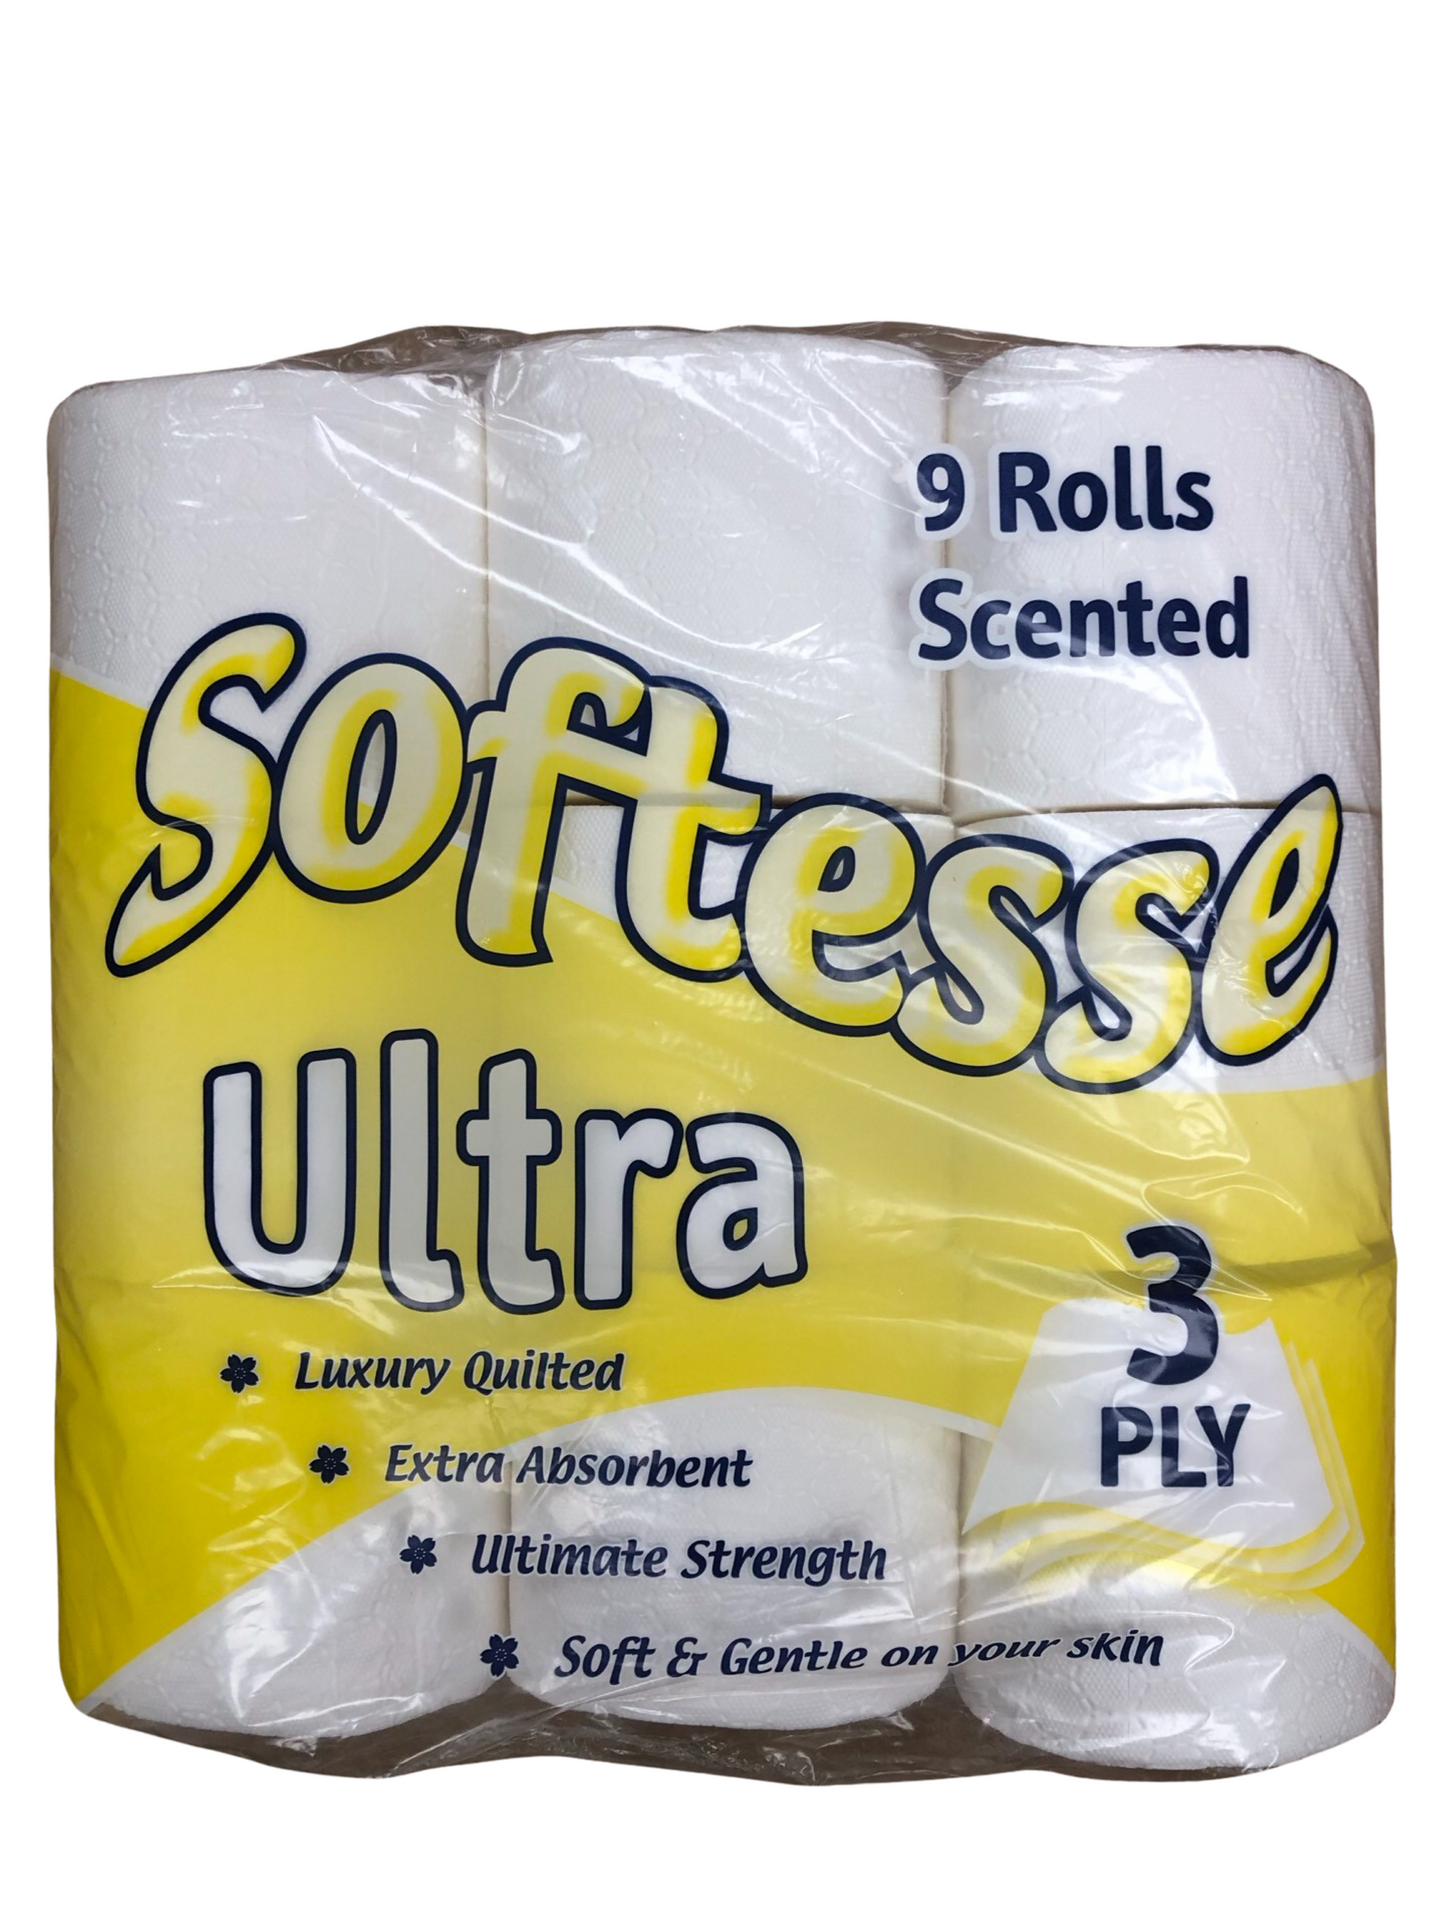 Softesse Ultra Luxury quilted 3ply toilet Roll. 9 Rolls scented